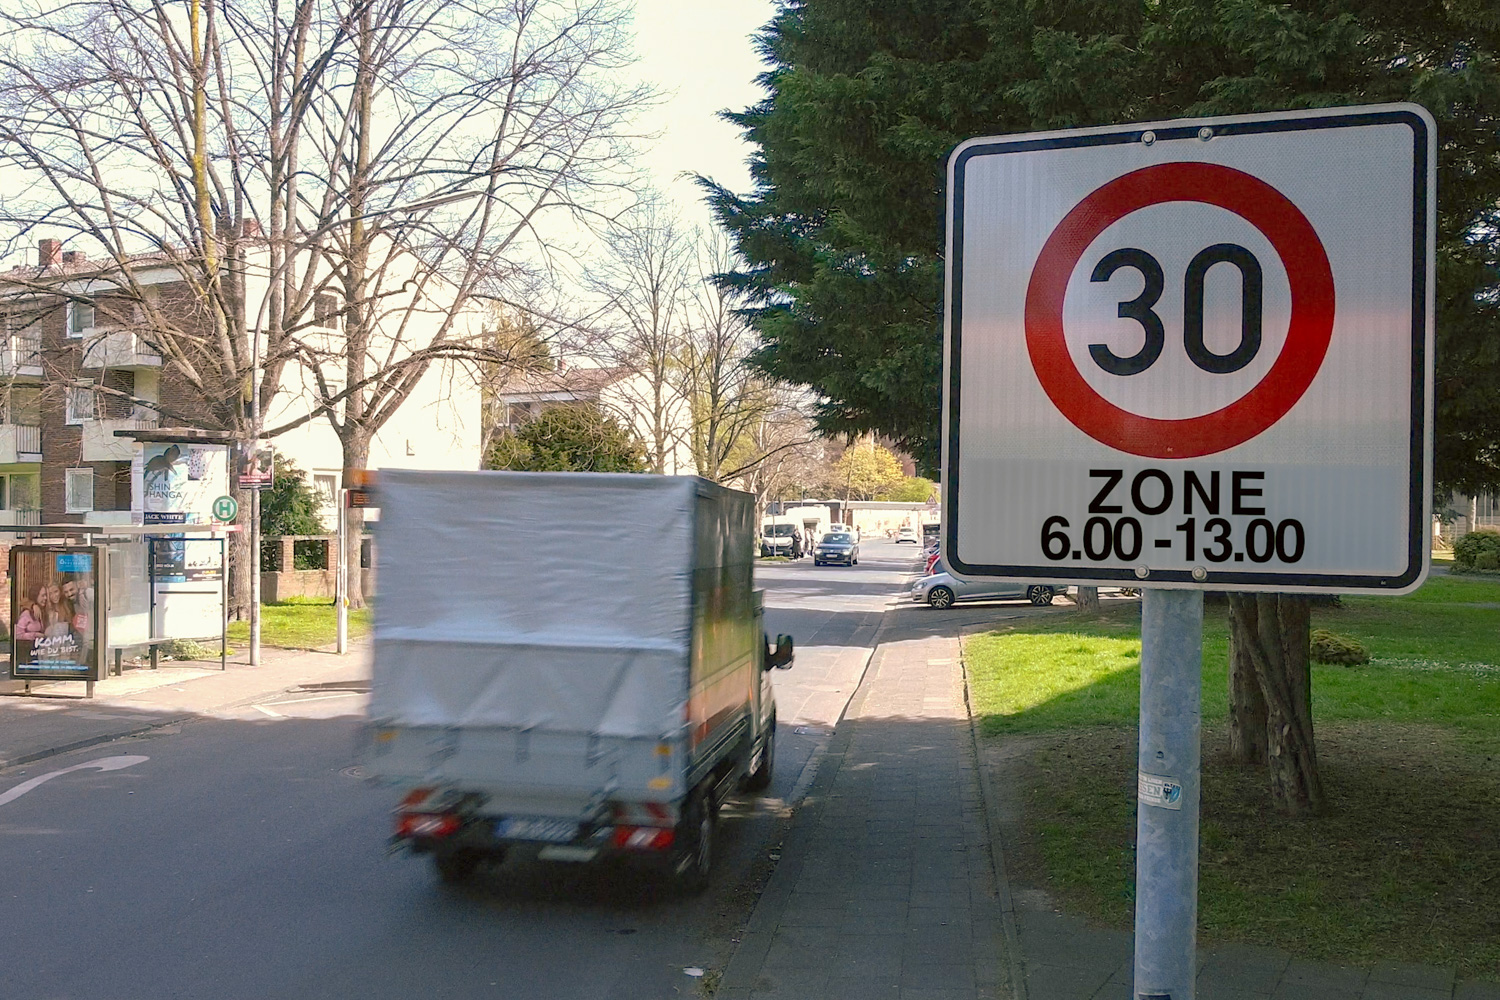 Ford trialling geofenced speed limits